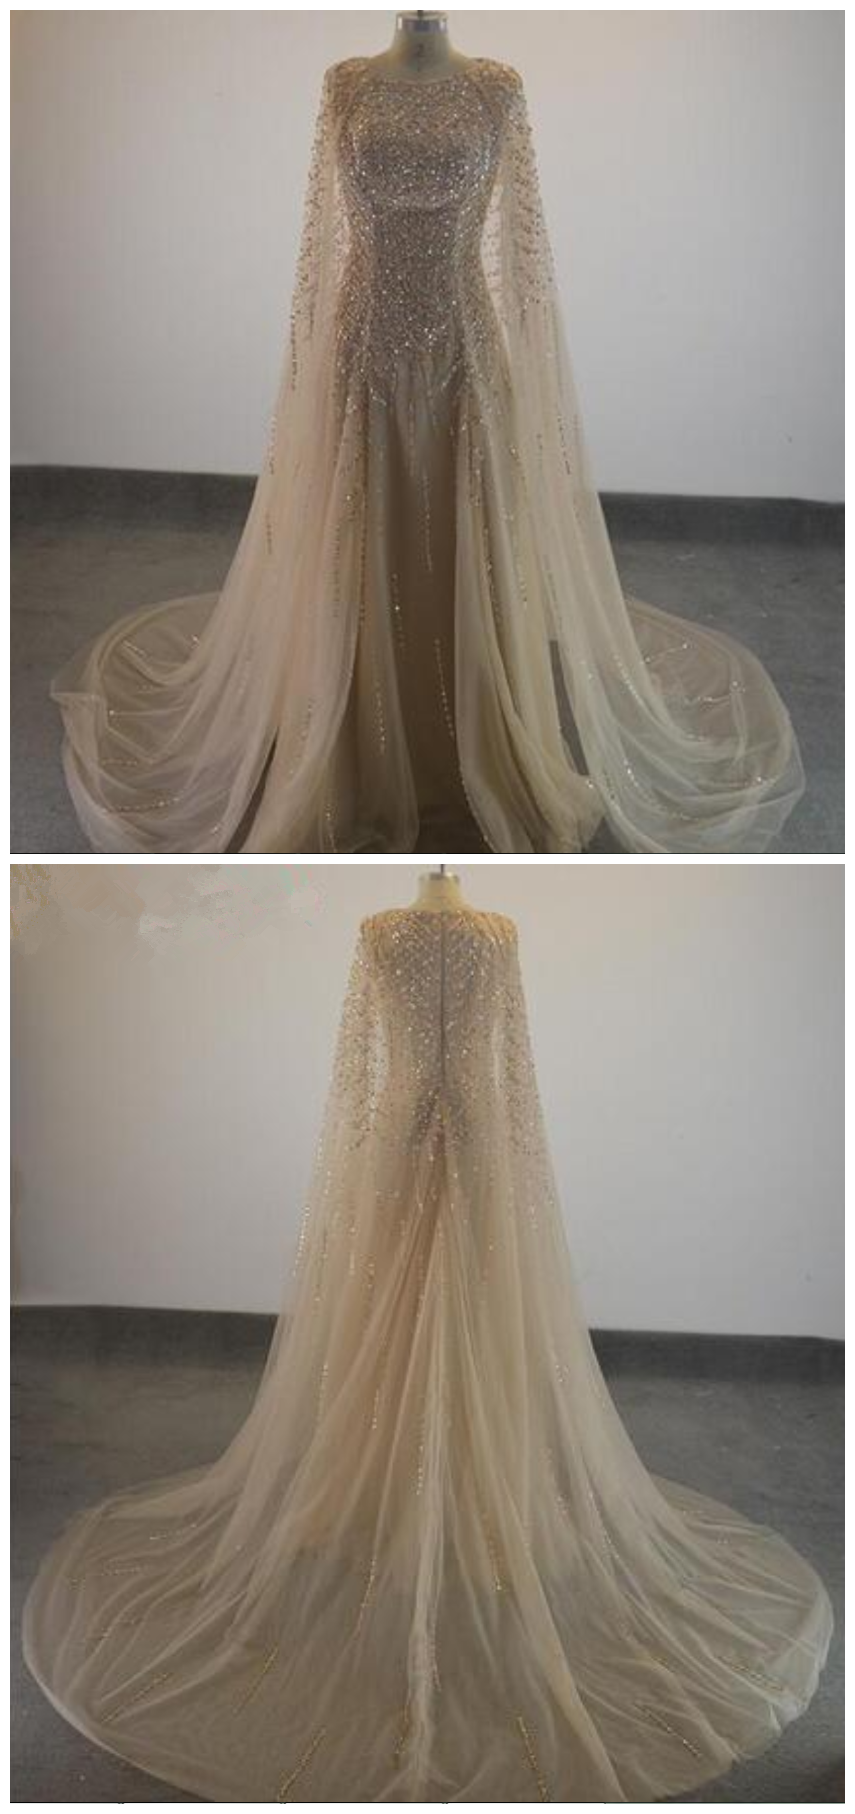 Elegant Formal Evening Dresses 2018 Champagne Tulle Cape Ruffles Real Photo Show Long Sheer Prom Party Gowns Evening Wear Dress